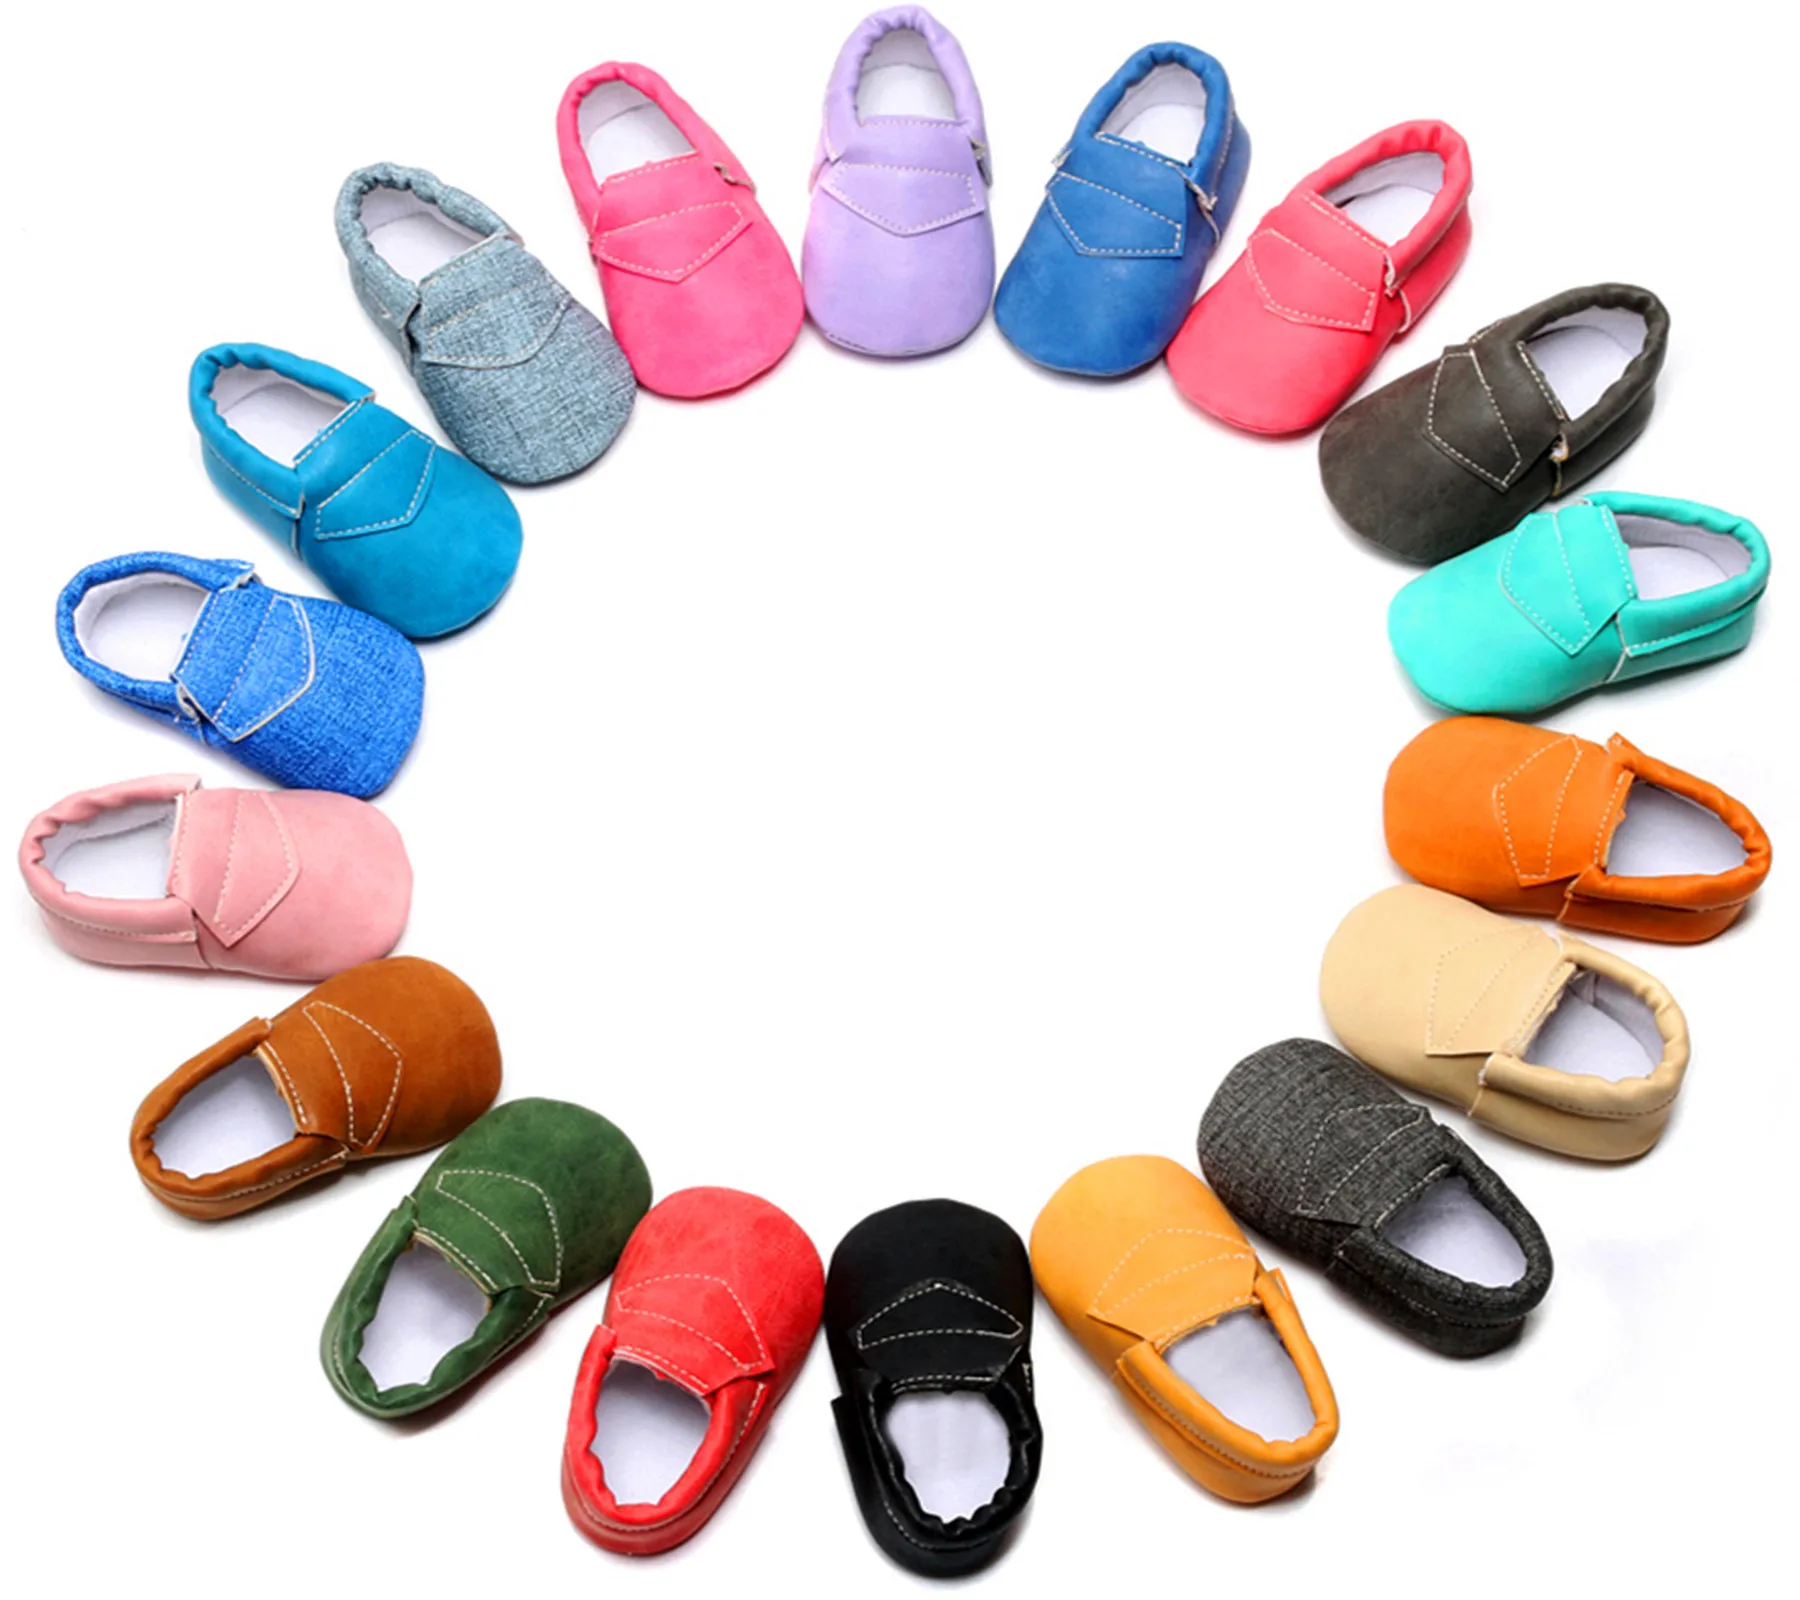 

New Hard Sole Soft PU Leather Baby Girls Boy Shoes Fringe Baby Moccasins For 0-24 M, 4 colors